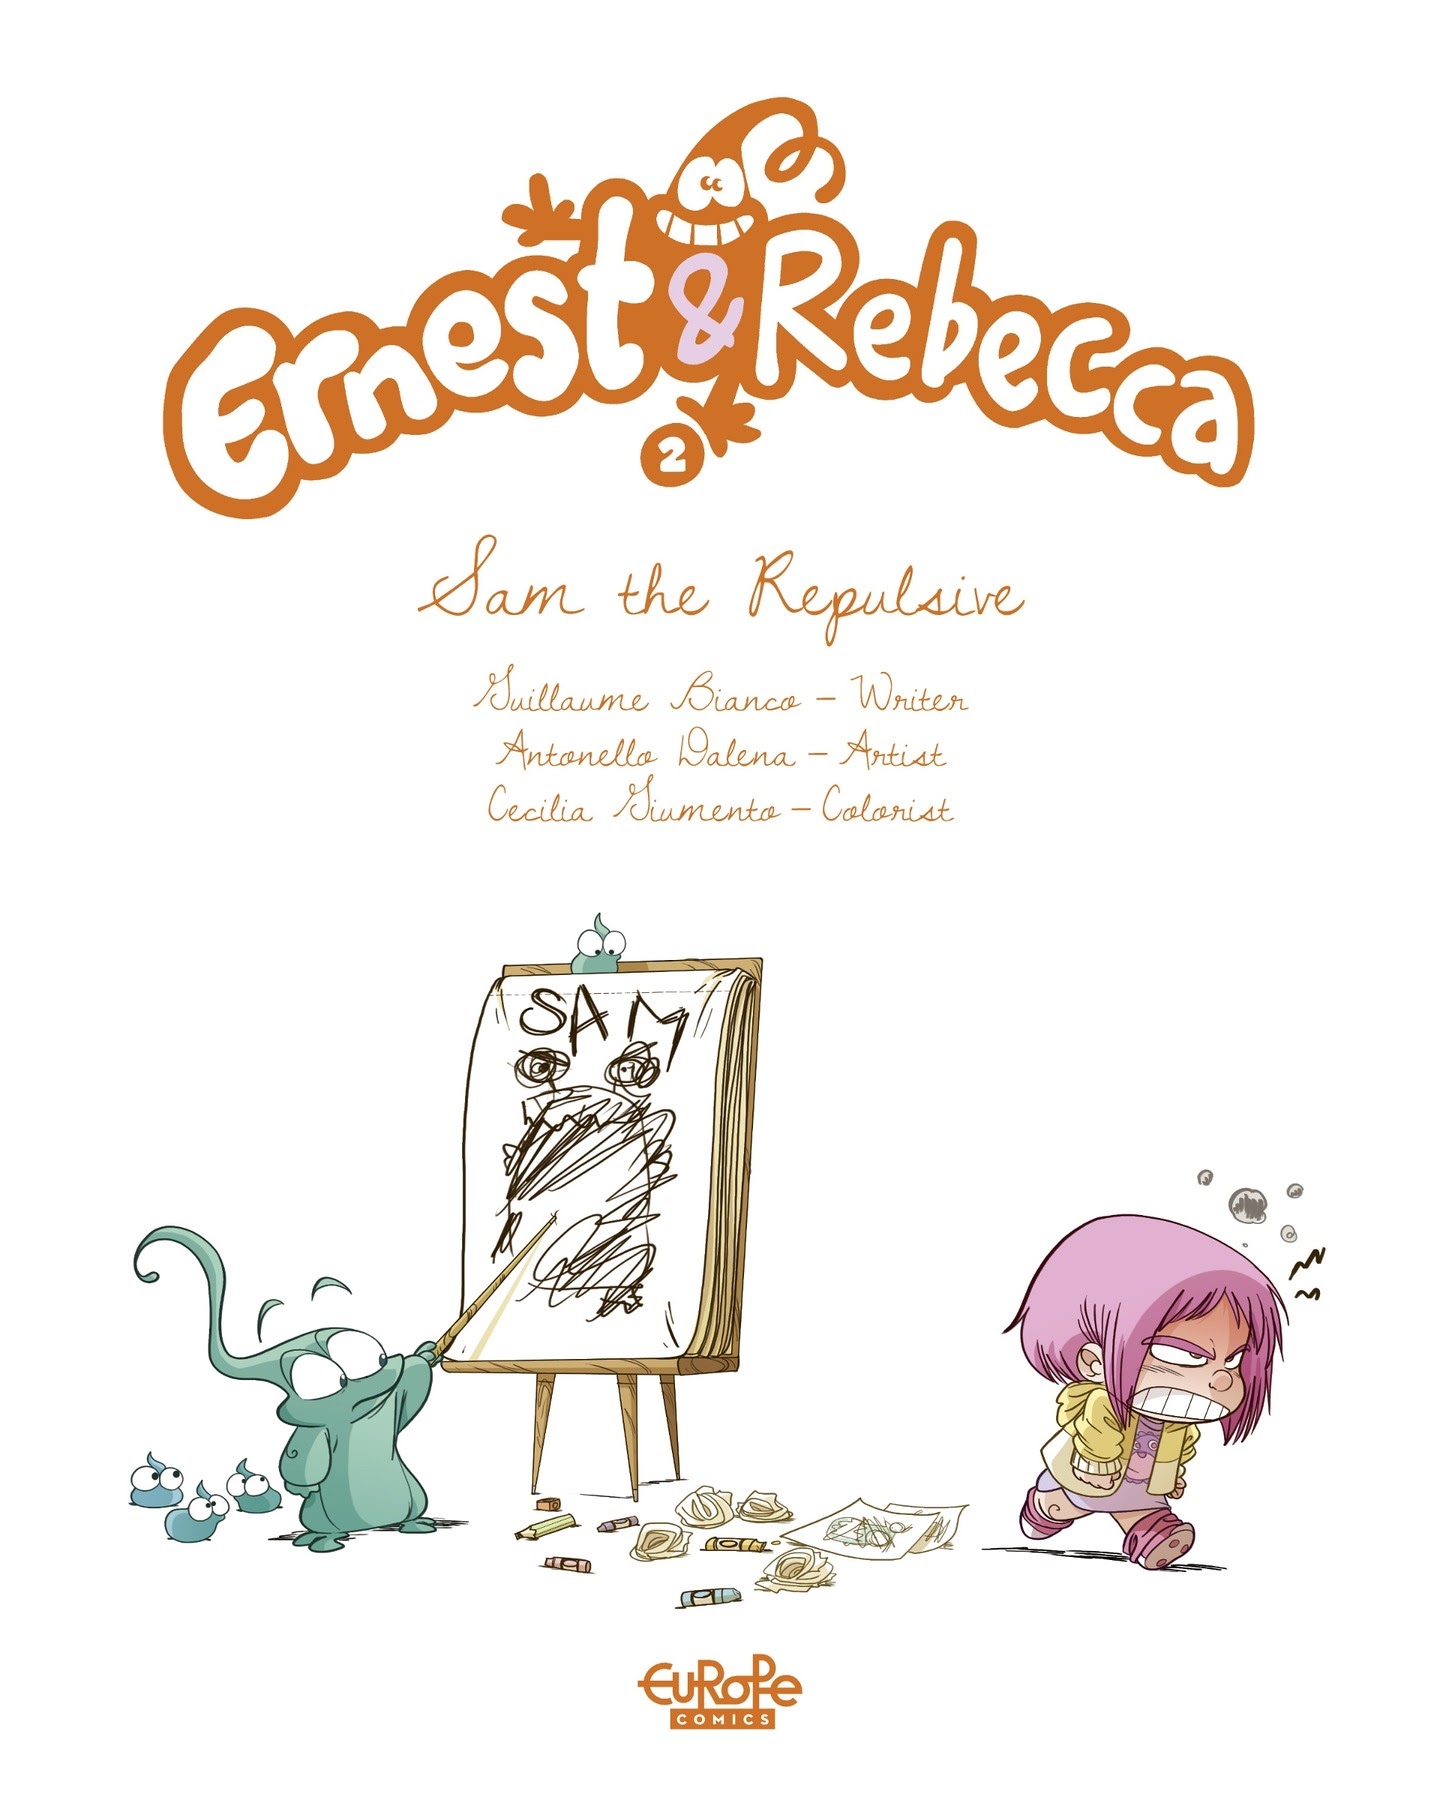 Read online Ernest & Rebecca comic -  Issue #2 - 3